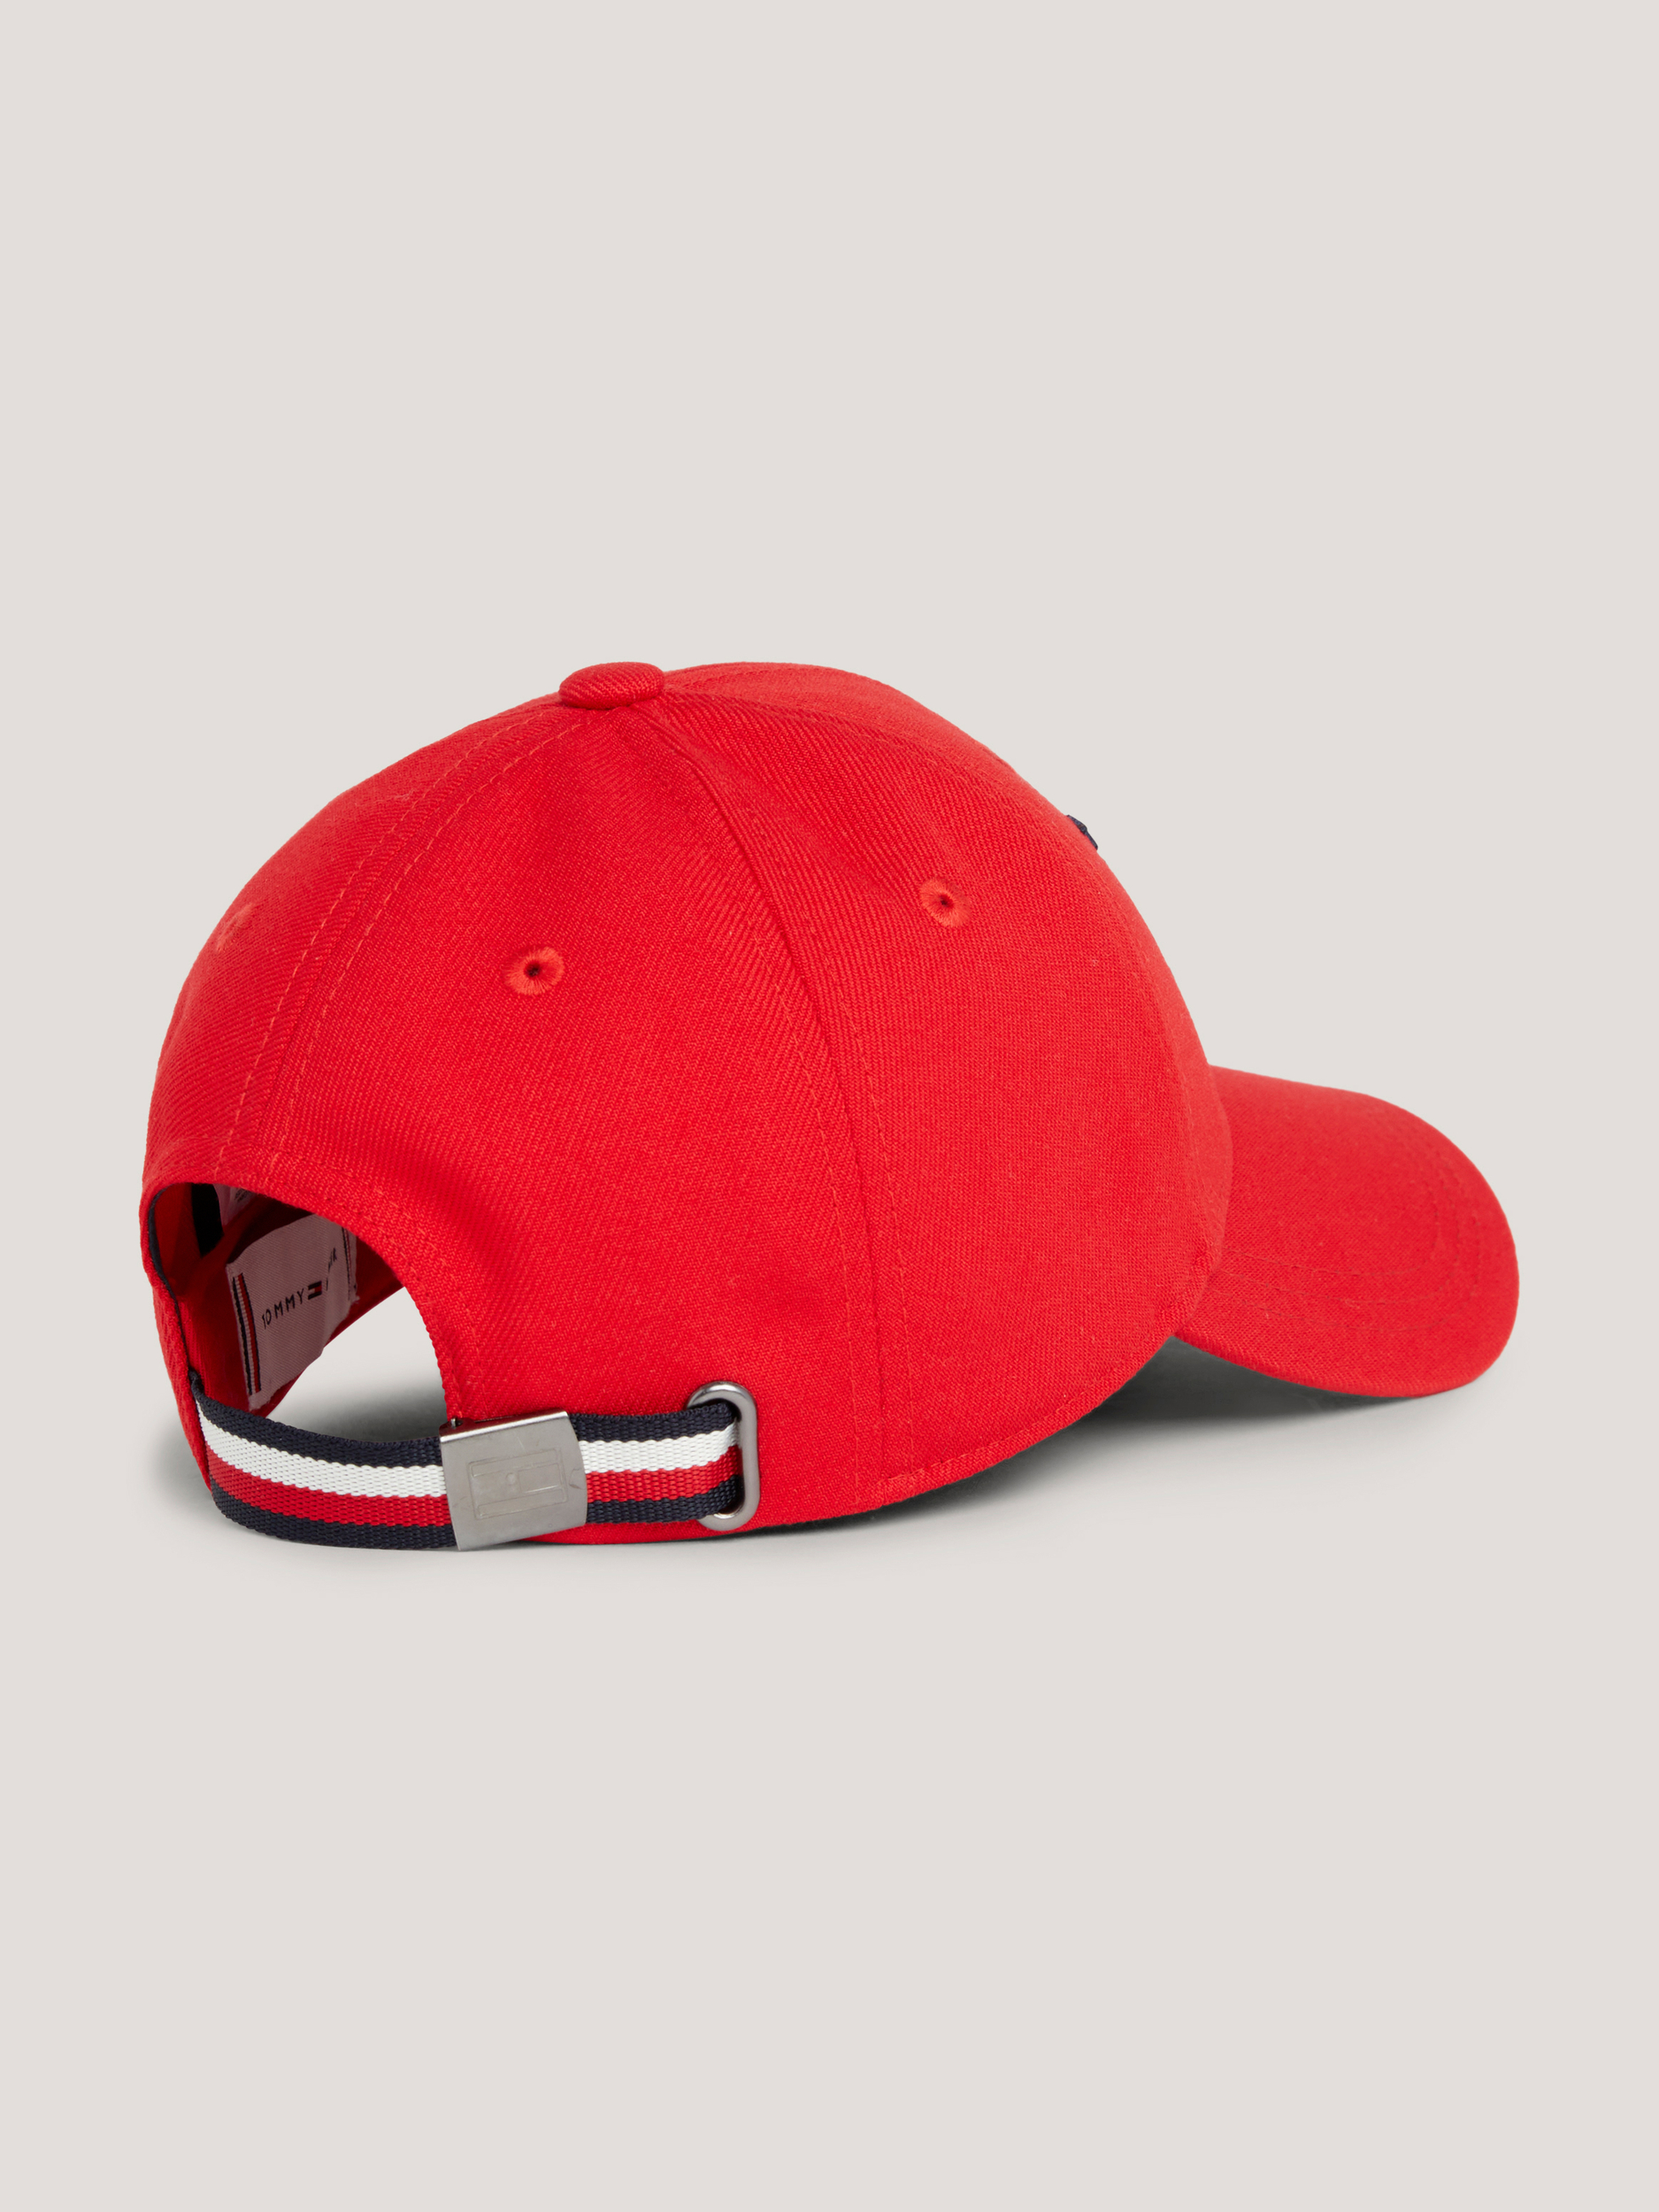 casquette-tommy-hilfiger-montreal-rouge (2)